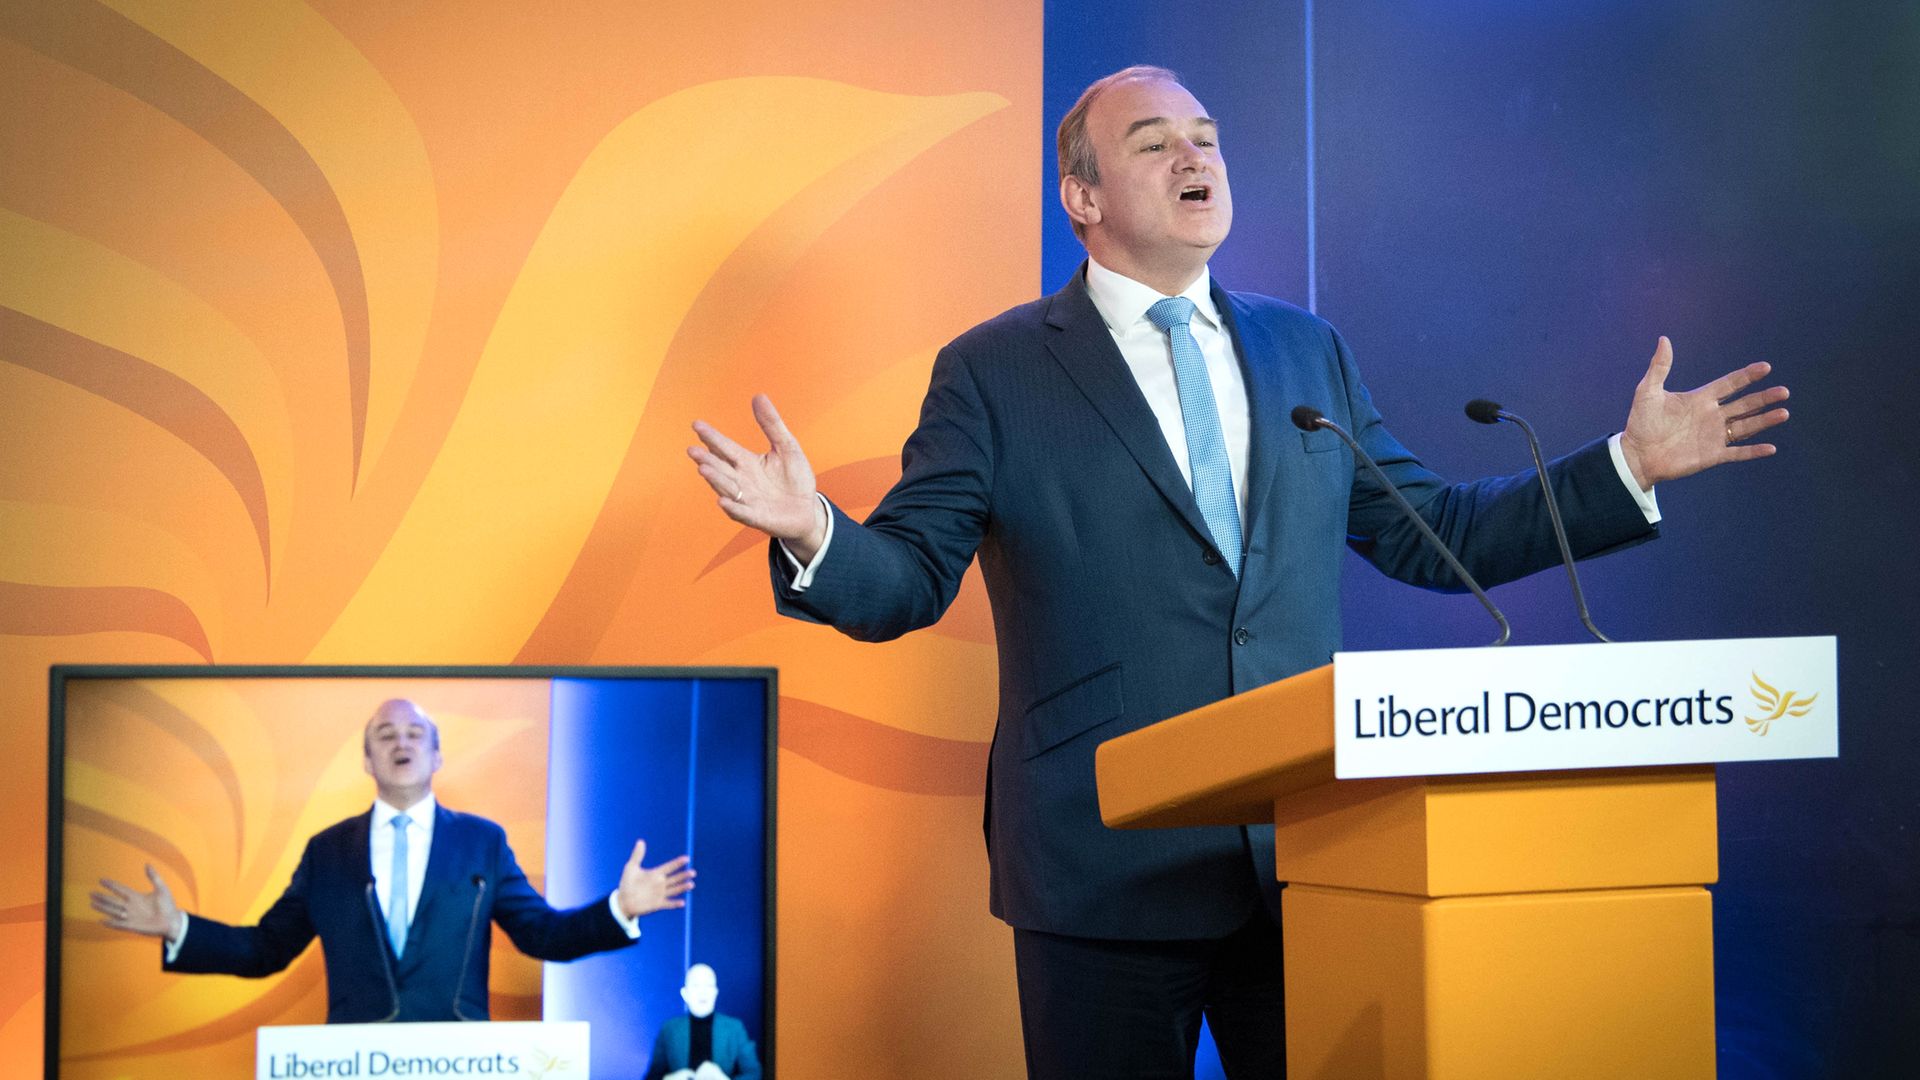 Liberal Democrat leader Sir Ed Davey delivers a keynote speech during an online party conference - Credit: PA